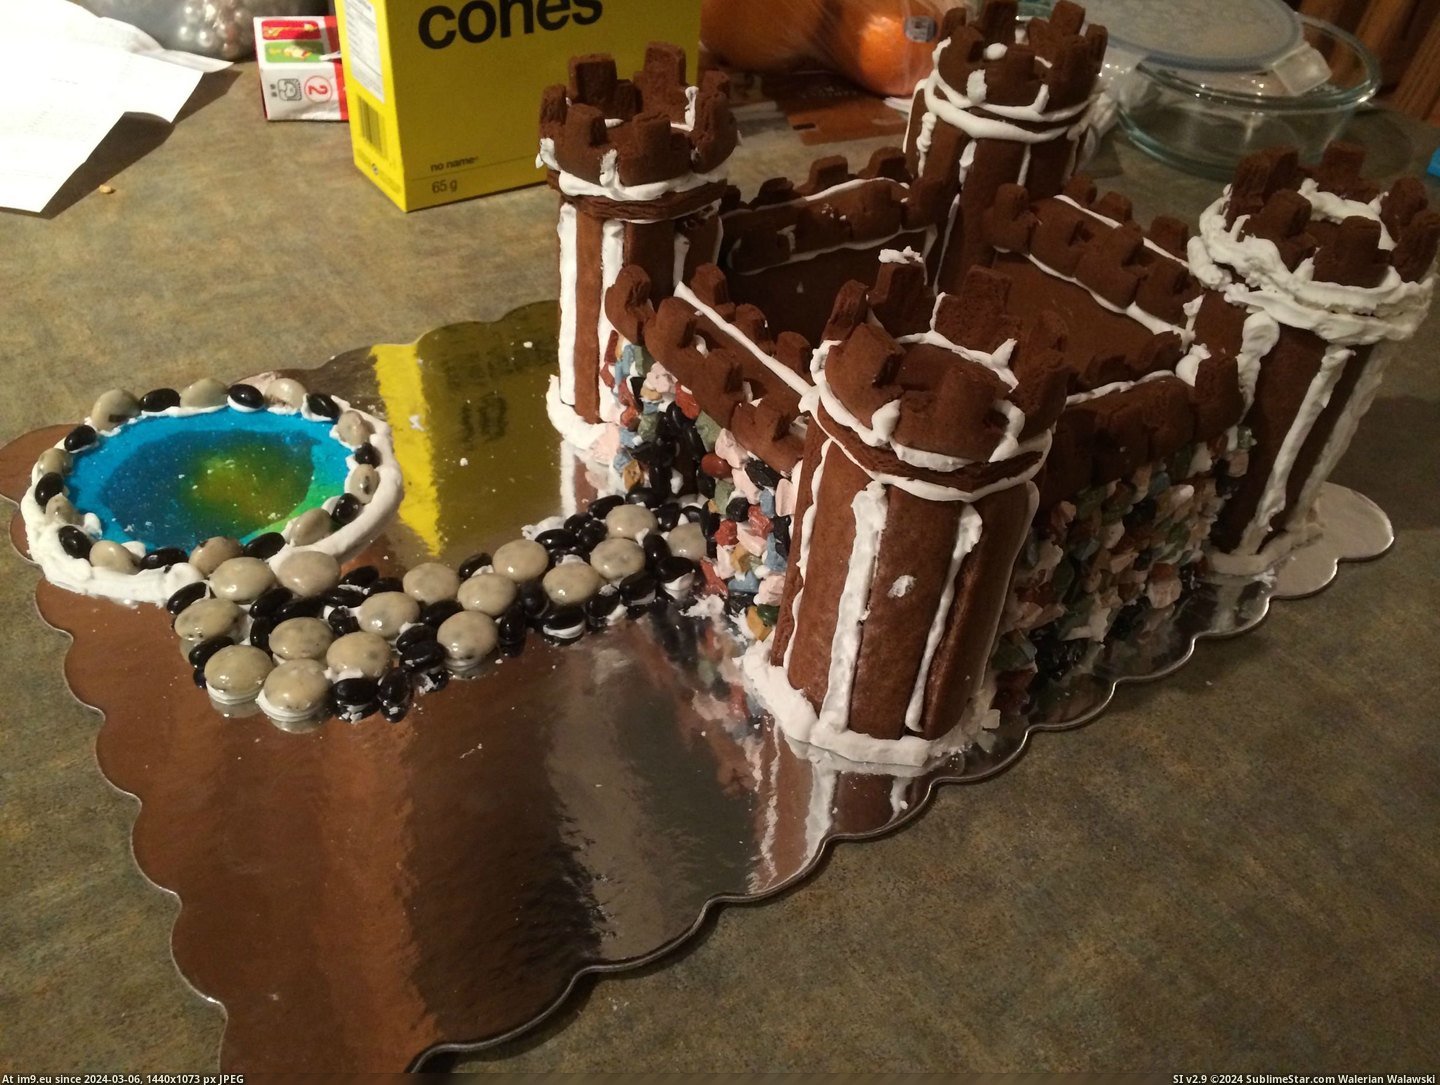 #Husband #Get #Our #Divorced #Collaborated #Project #Gingerbread #Success [Pics] My husband and I collaborated on our first gingerbread project and didn't get divorced...success! 12 Pic. (Obraz z album My r/PICS favs))